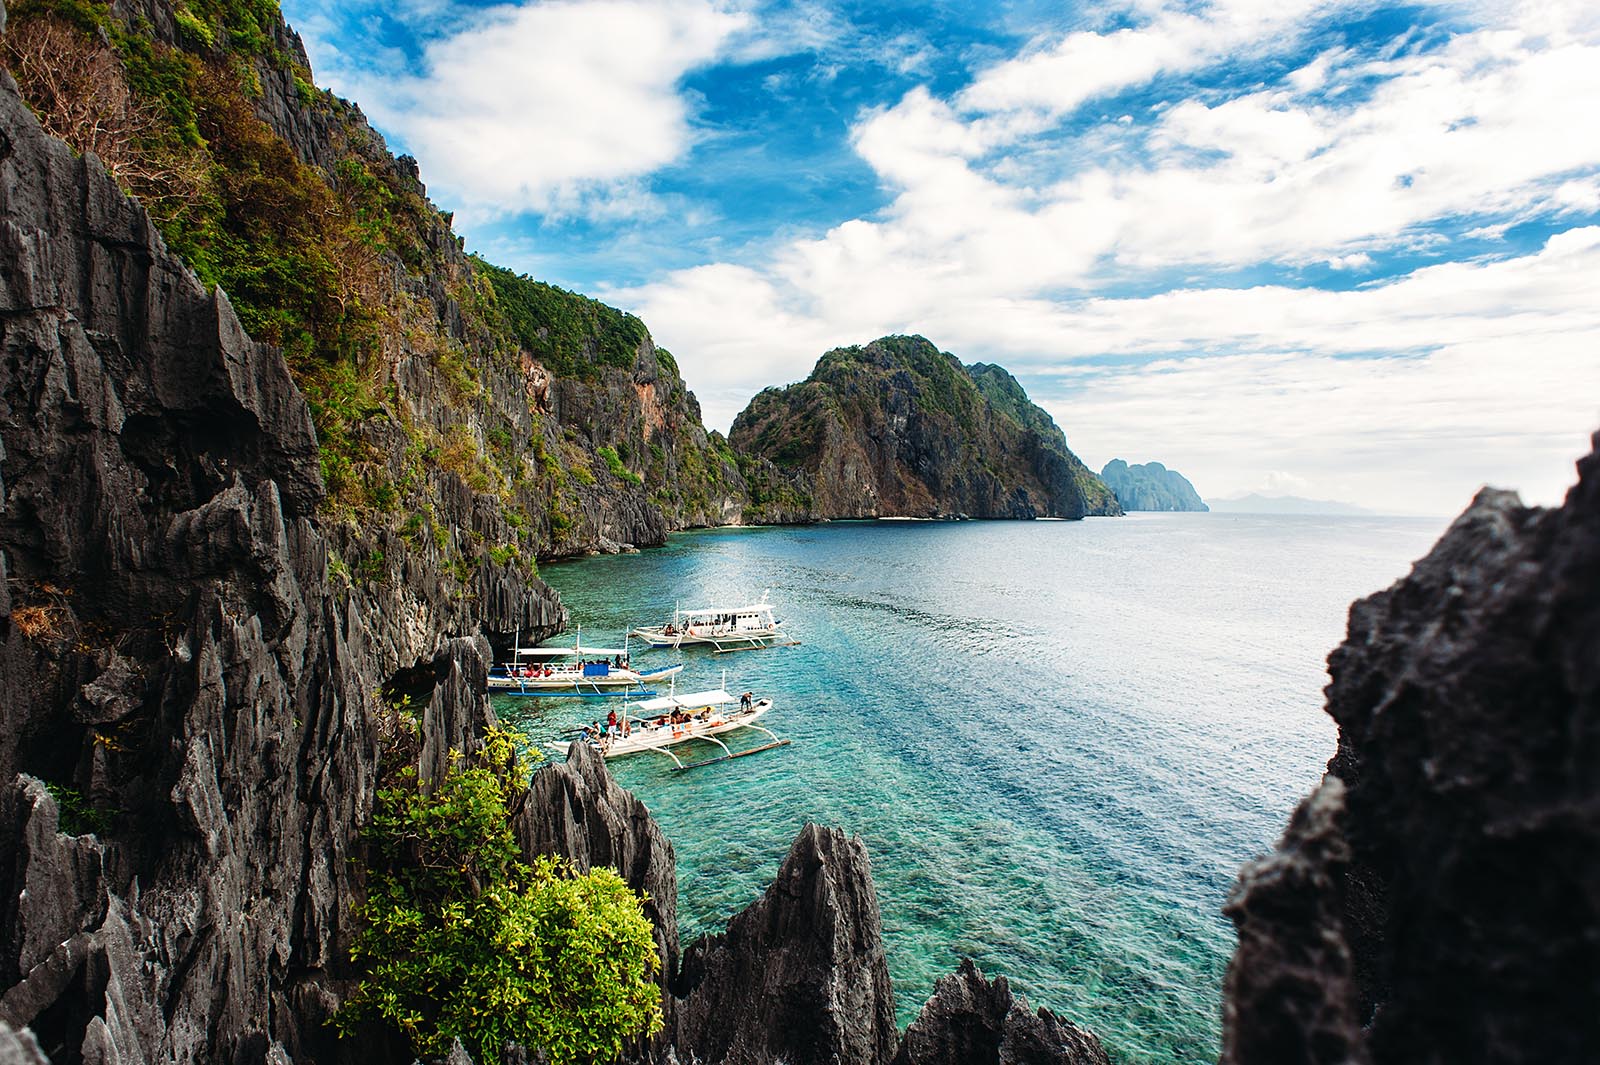 The Ultimate 15 days in the Philipines